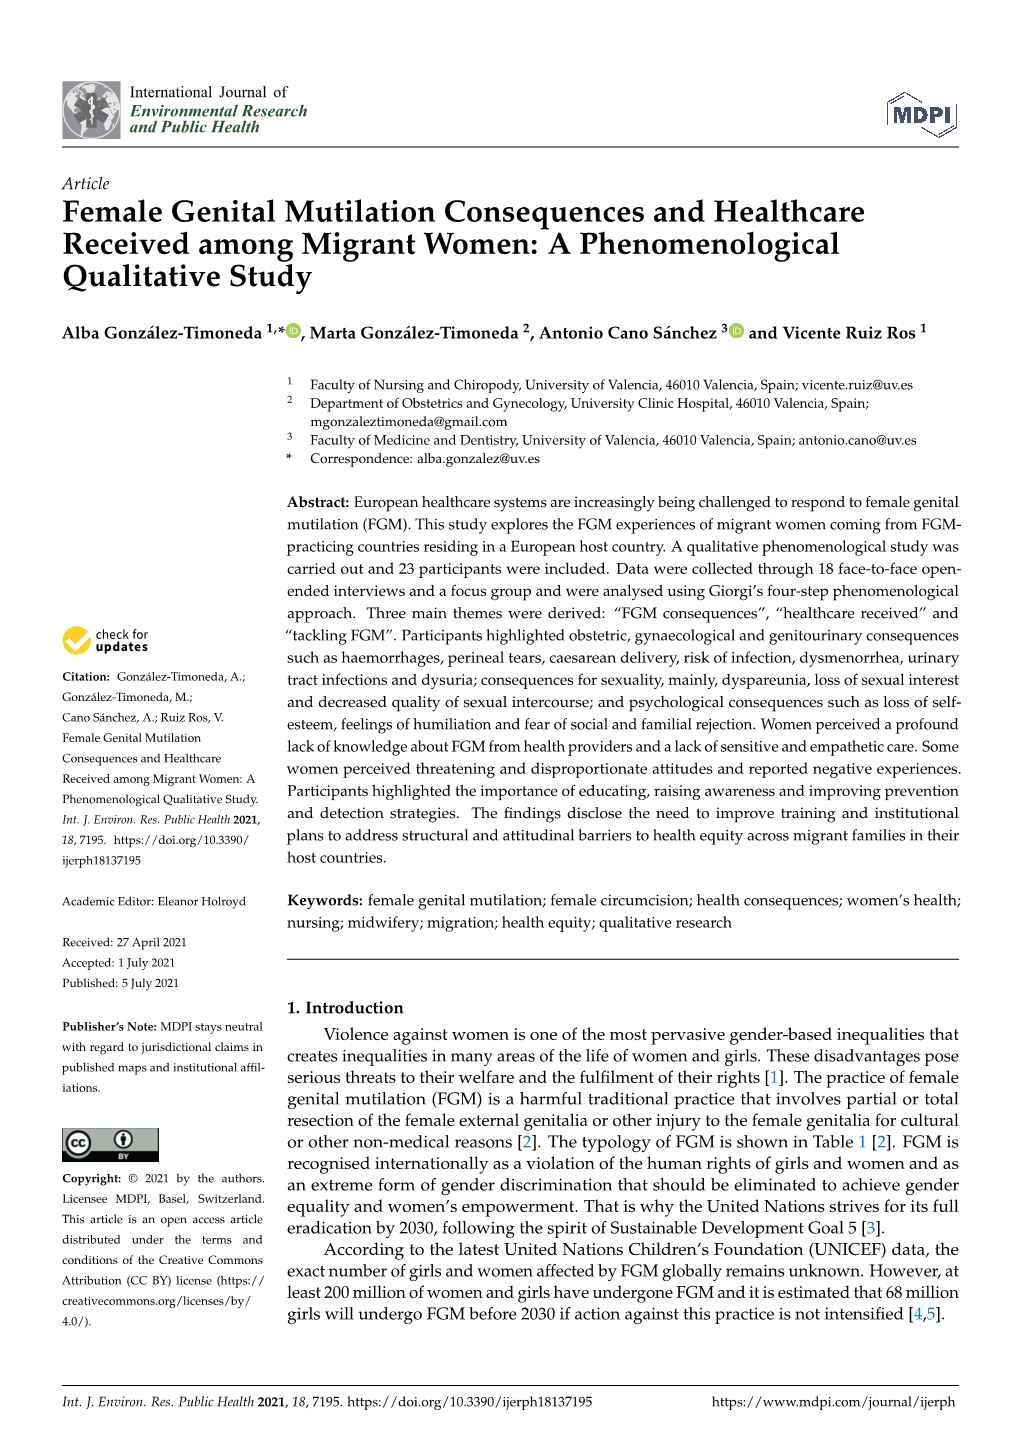 Female Genital Mutilation Consequences and Healthcare Received Among Migrant Women: a Phenomenological Qualitative Study